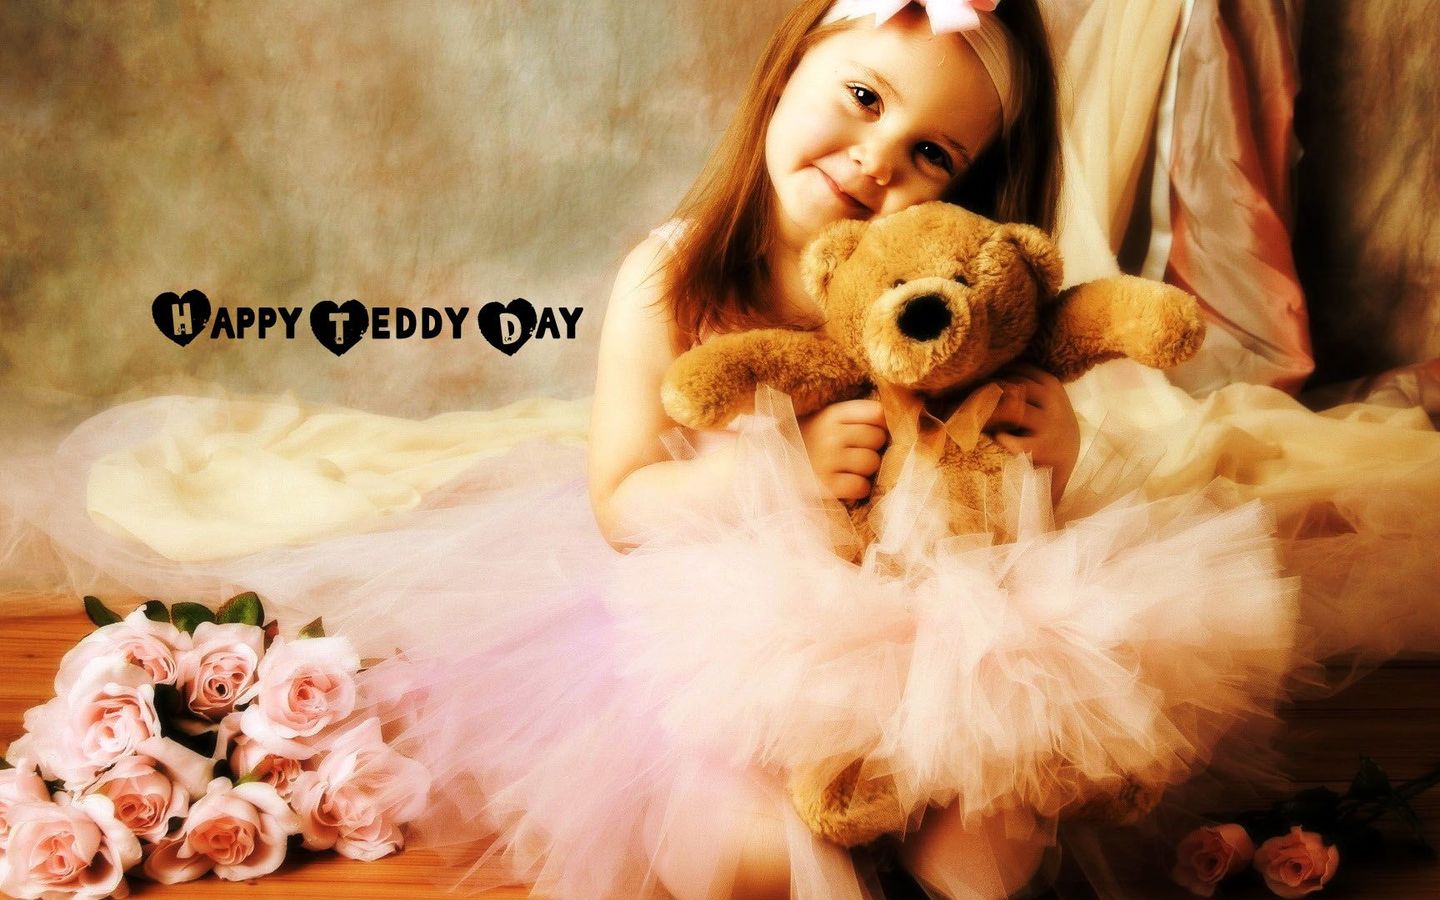 Teddy Day Background Picture Image